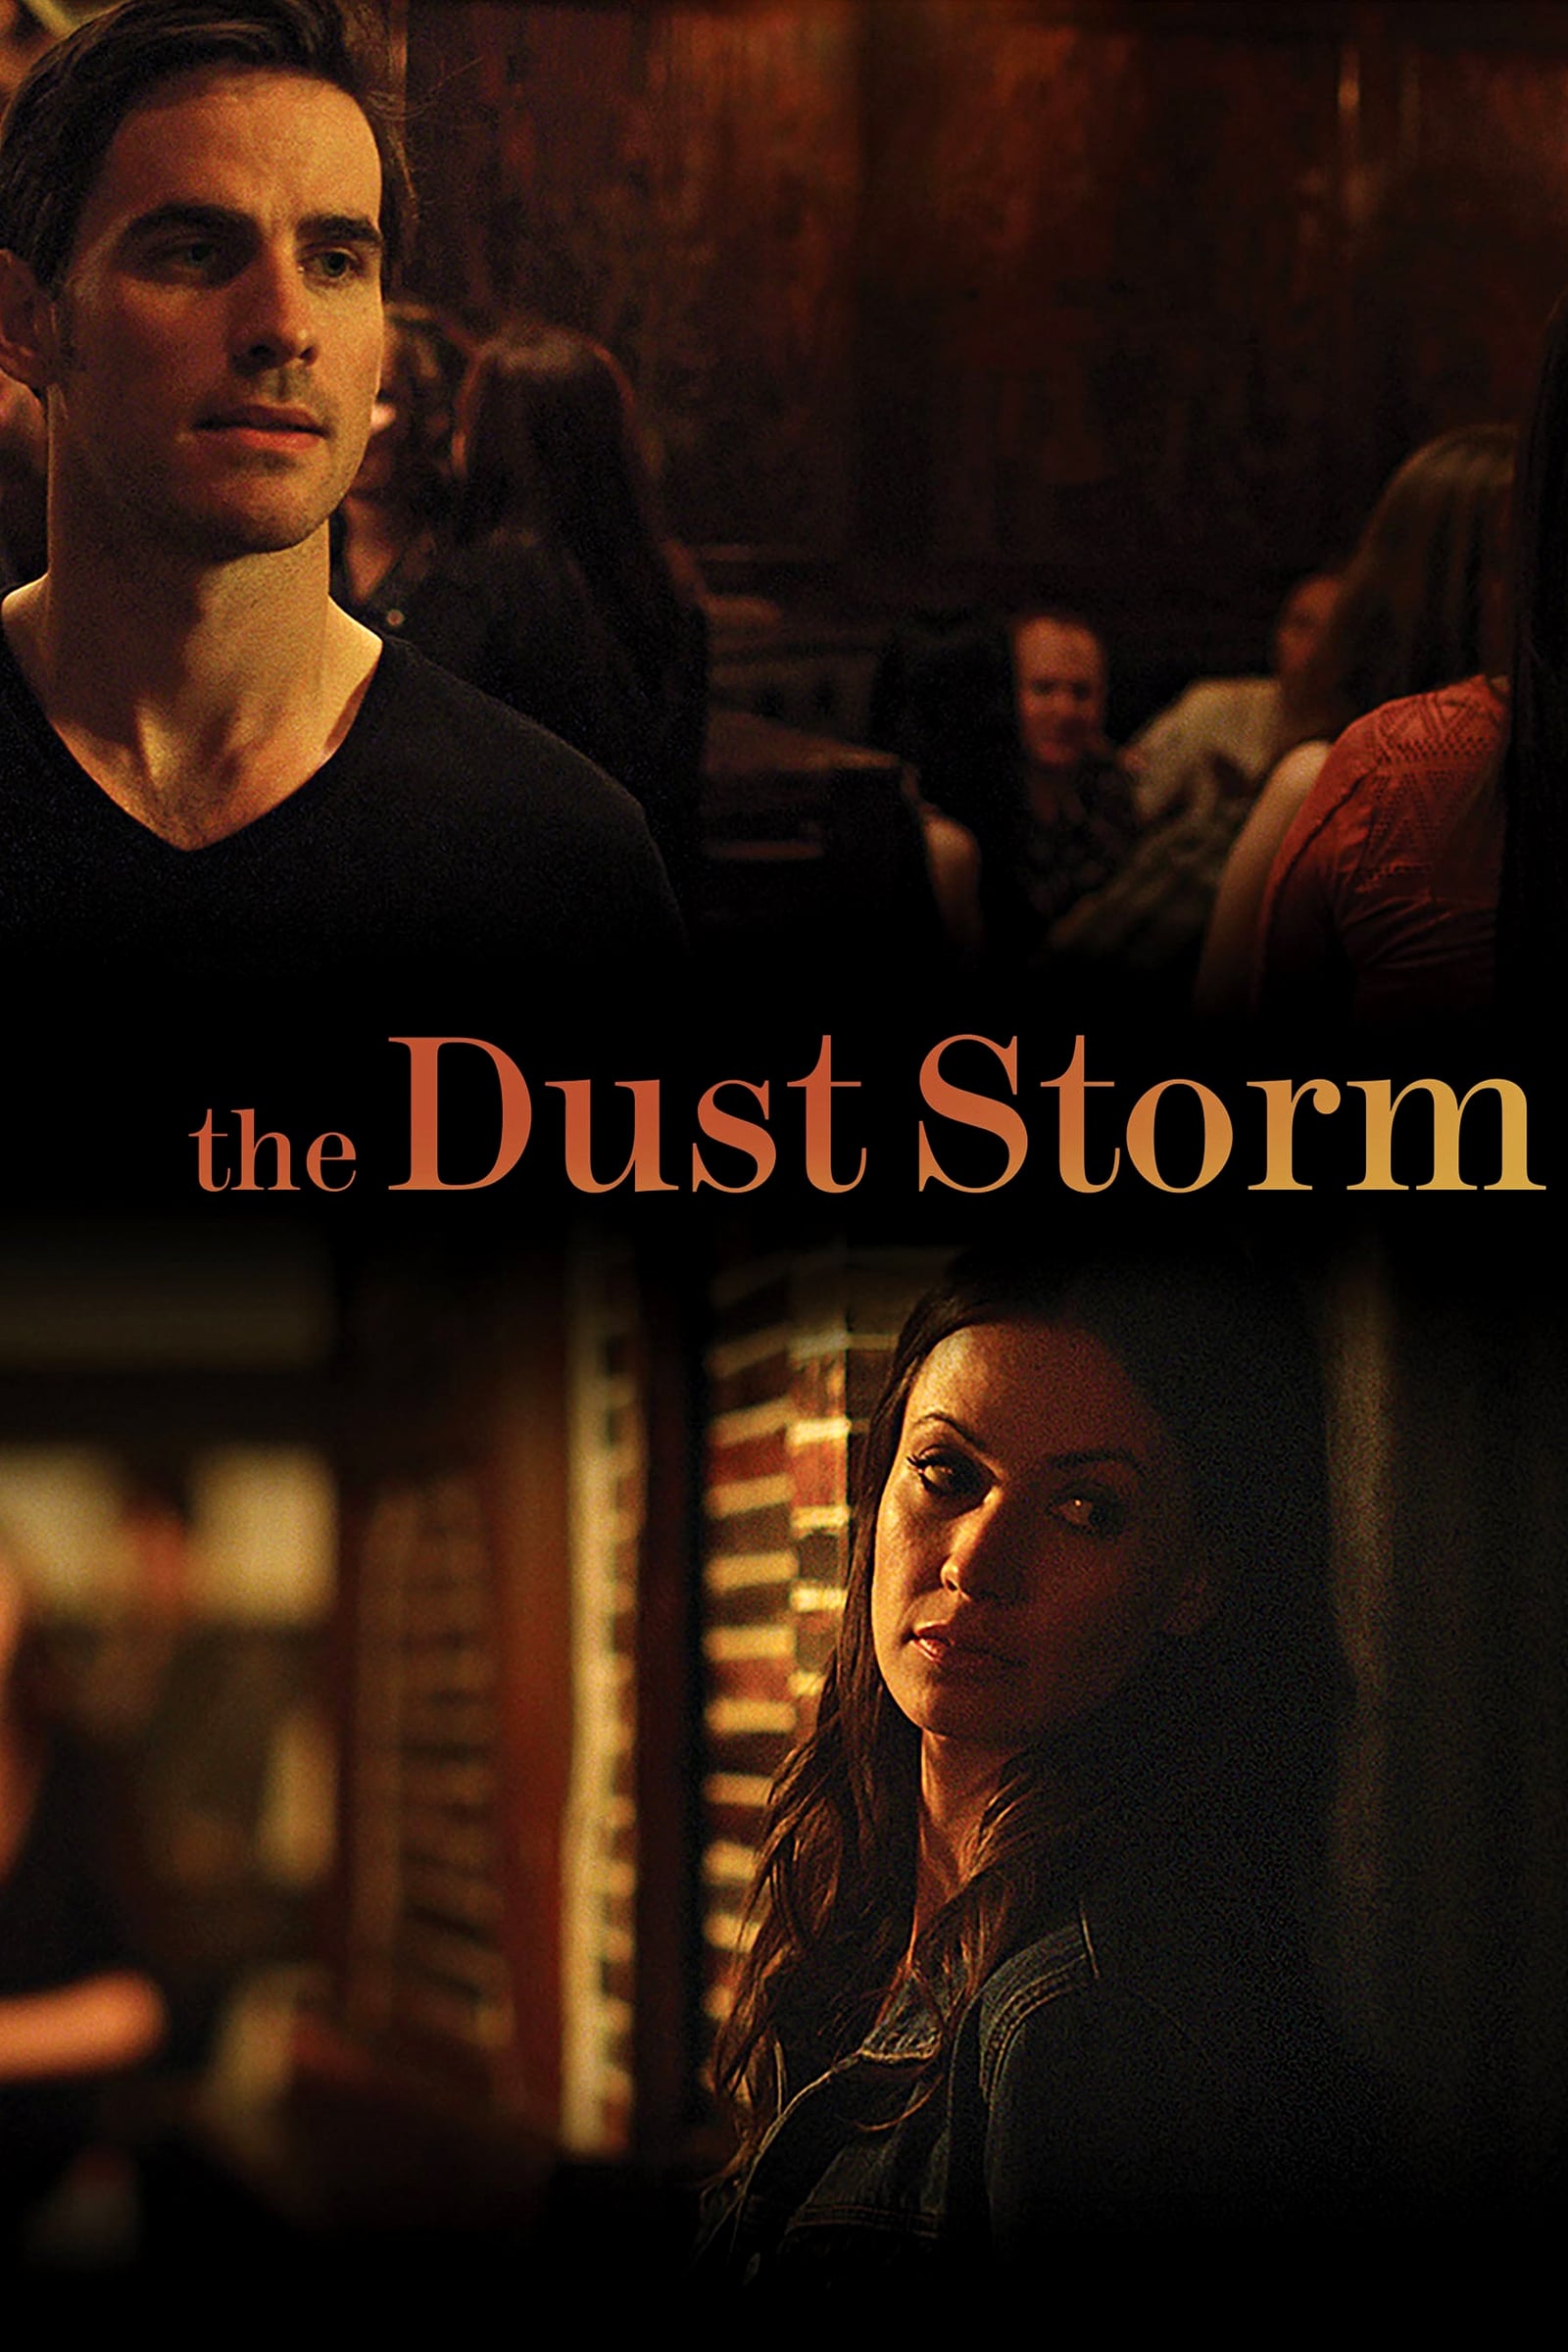 The Dust Storm film